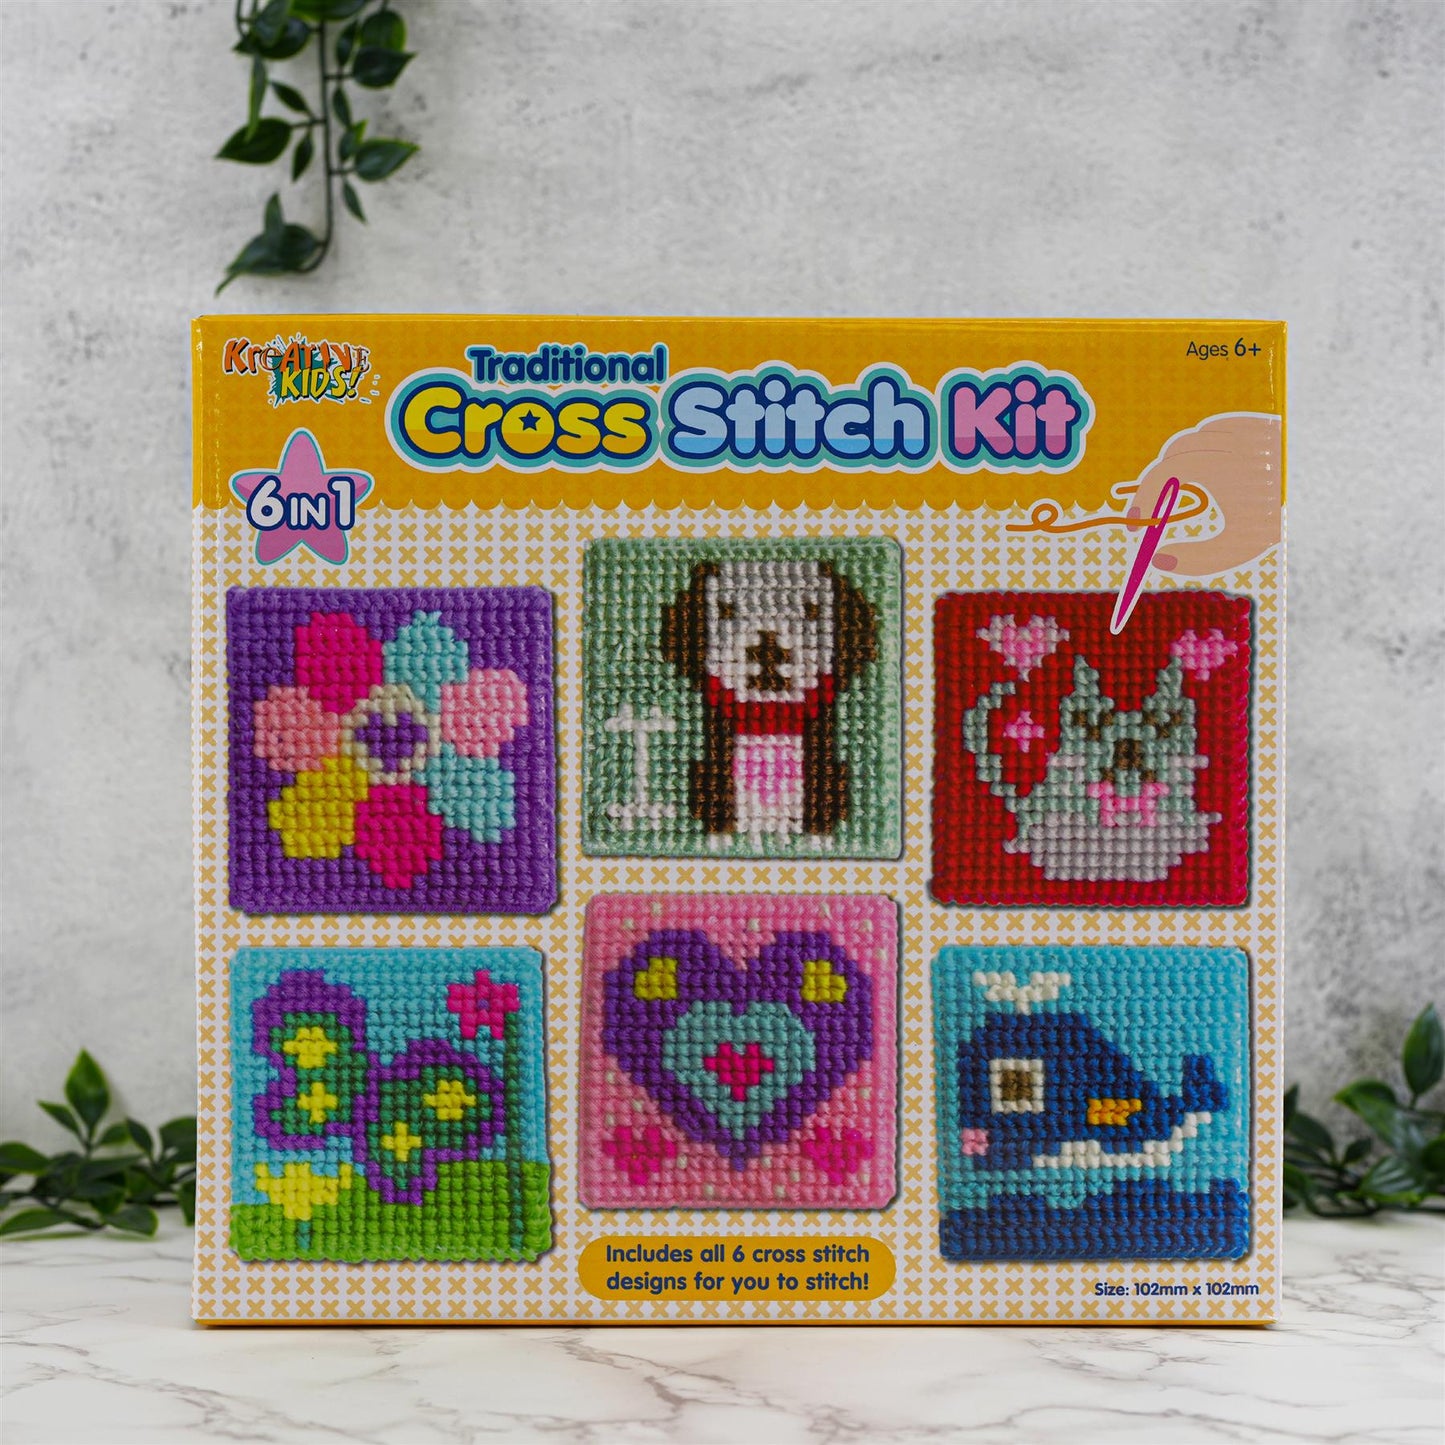 6 in 1 Traditional Cross Stitch Kit for Kids by The Magic Toy Shop - UKBuyZone